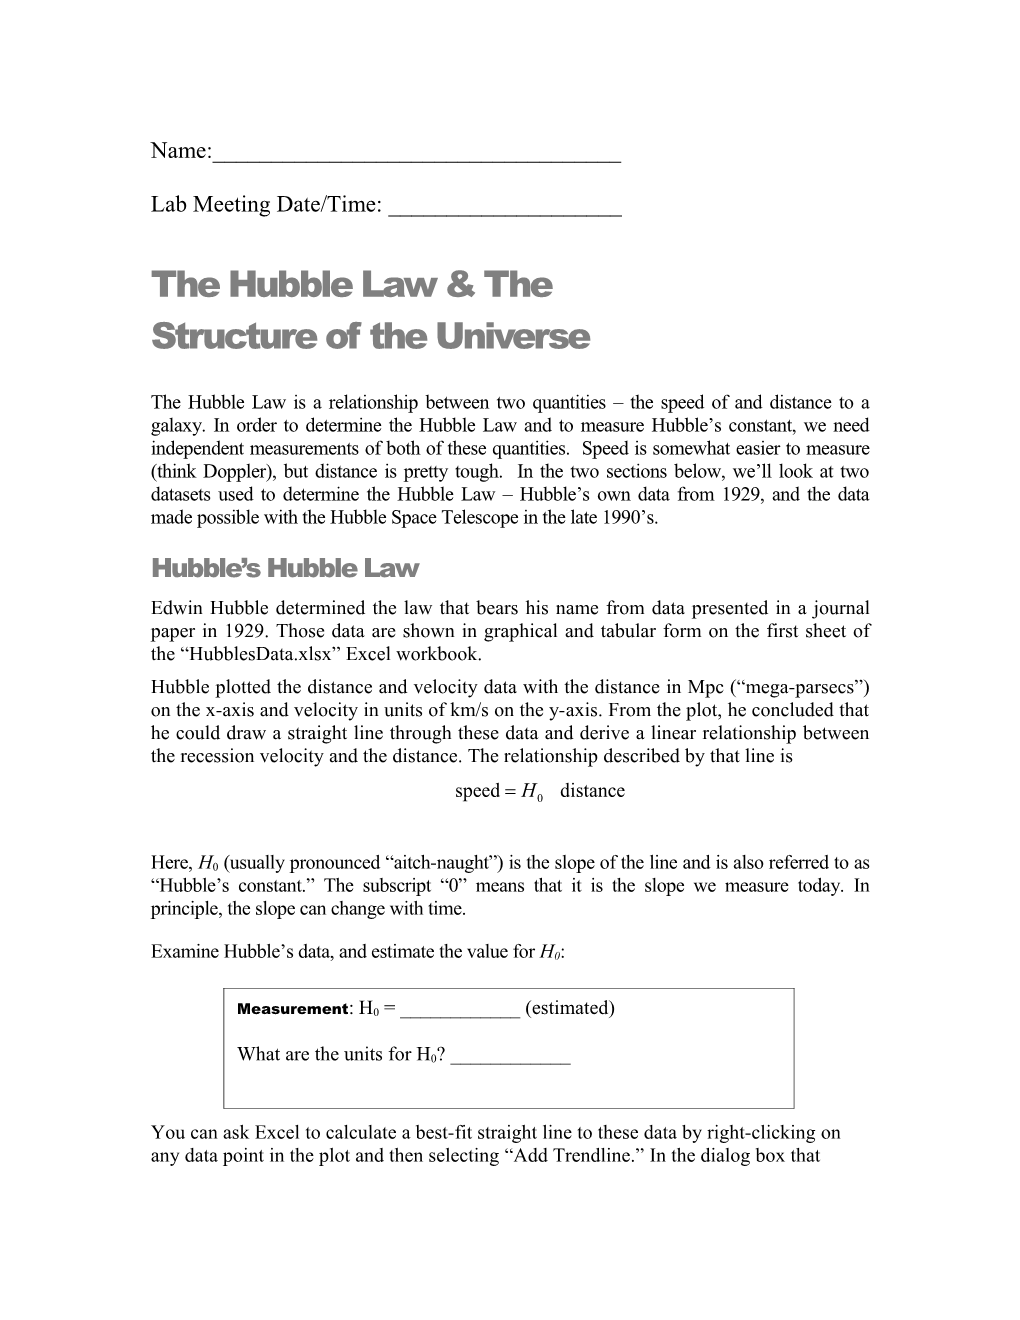 The Hubble Law & the Structure of the Universe